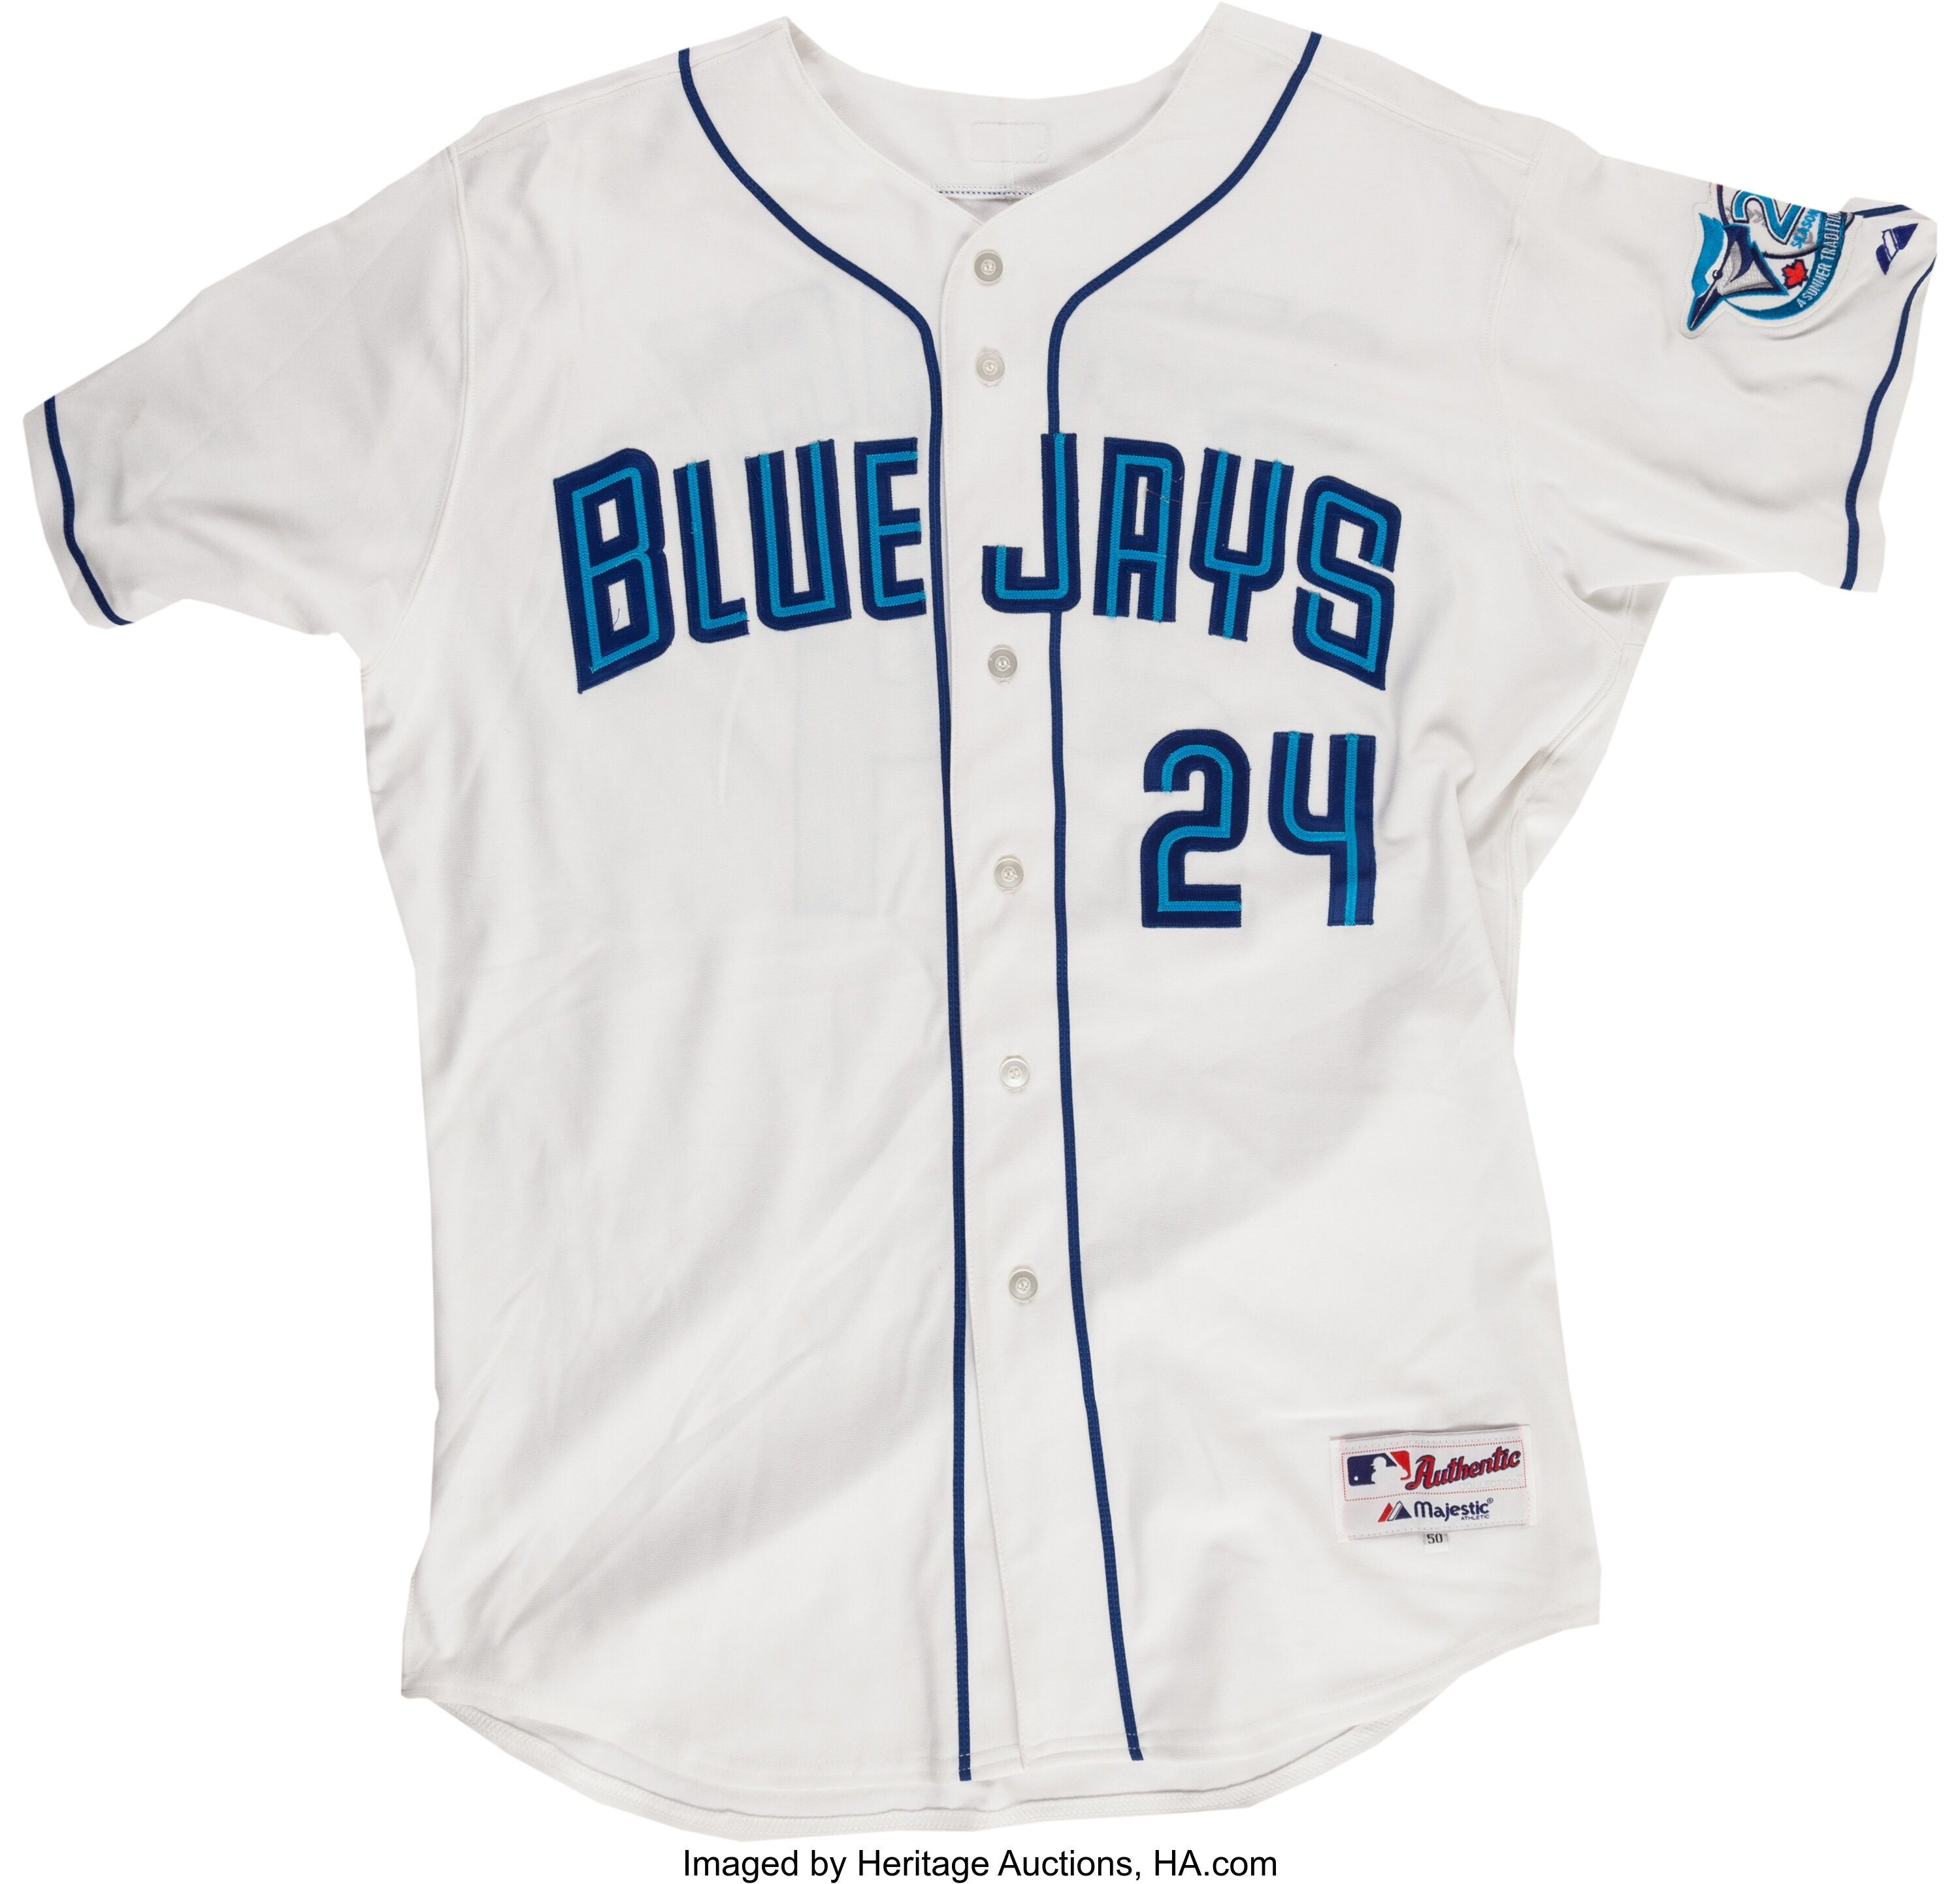 blue_jays_replica_cricket_jersey_front_